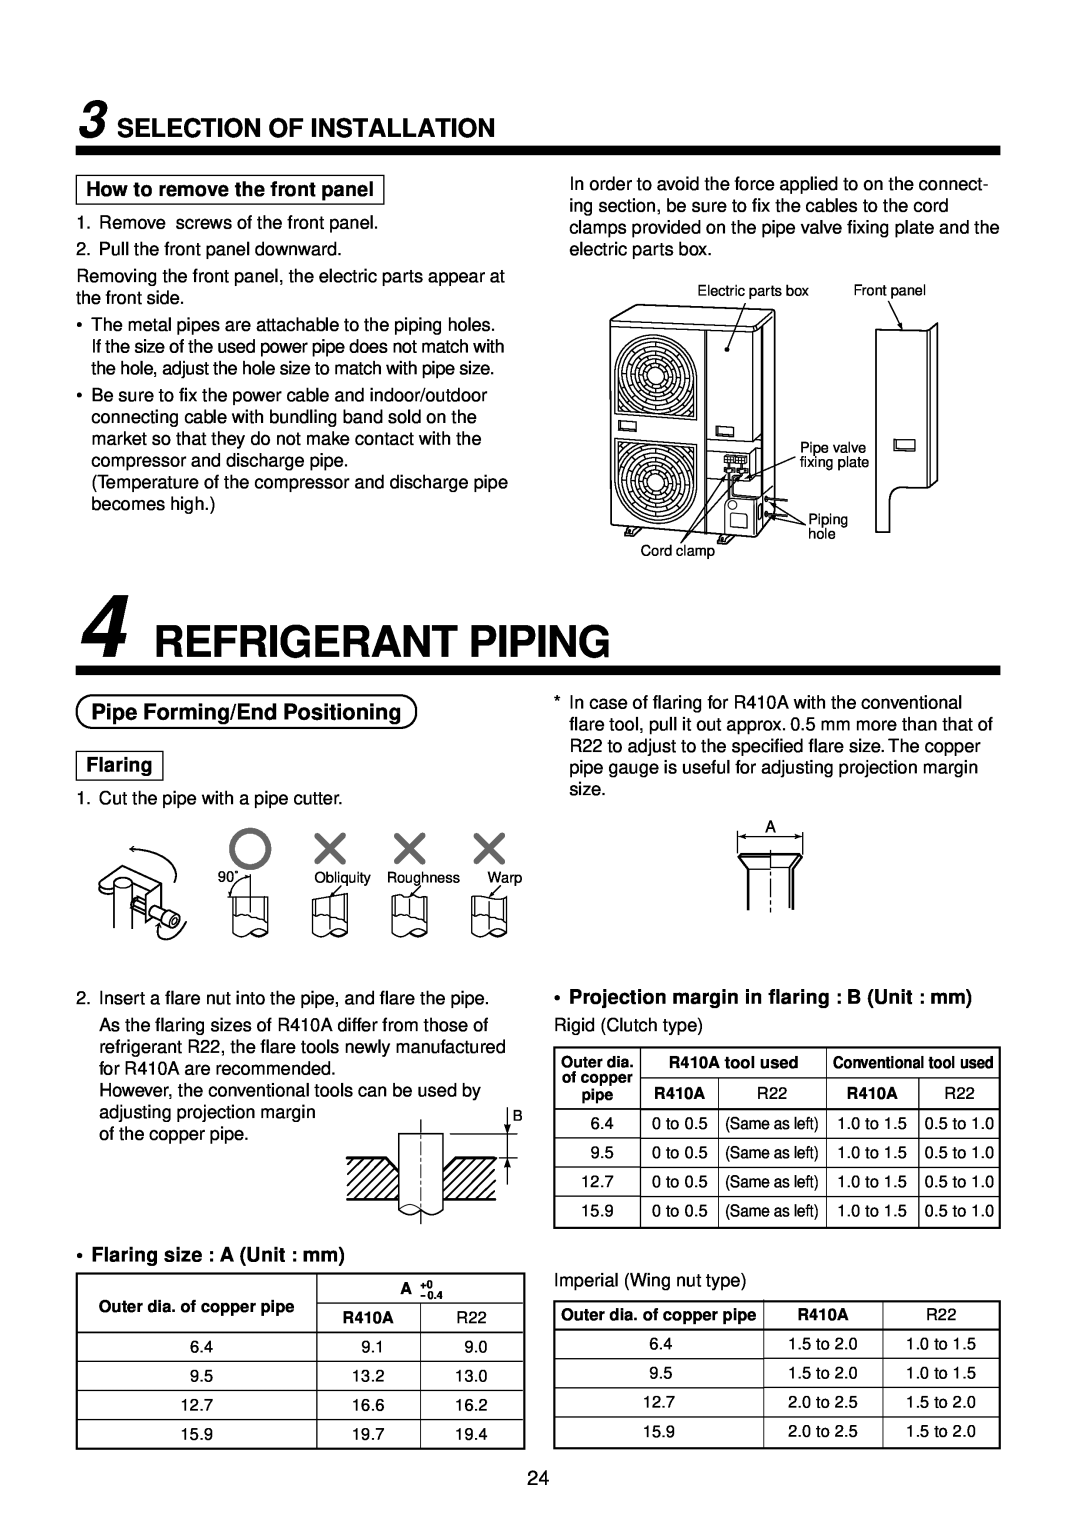 Toshiba R410A service manual Refrigerant Piping, Pipe Forming/End Positioning, How to remove the front panel, Flaring 